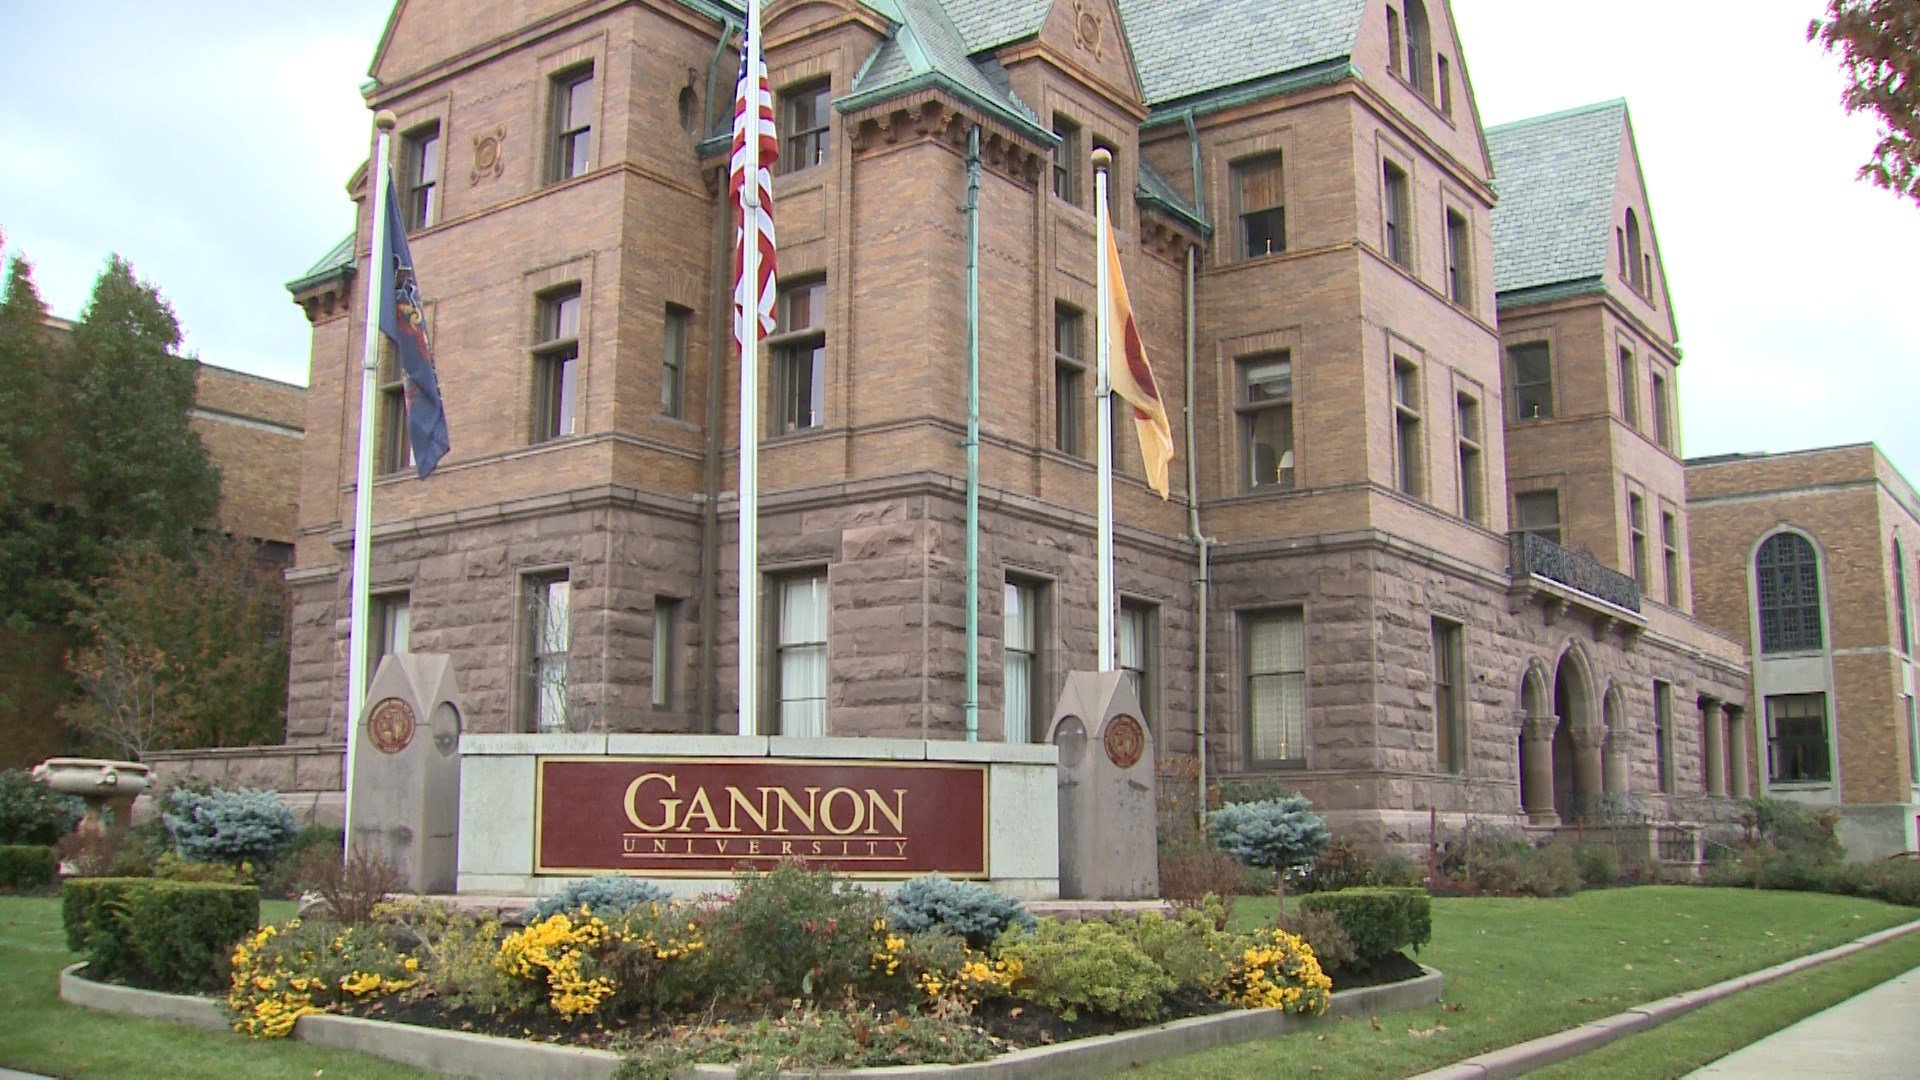 Gannon University Awarded $40K to Address Student Food Insecurity